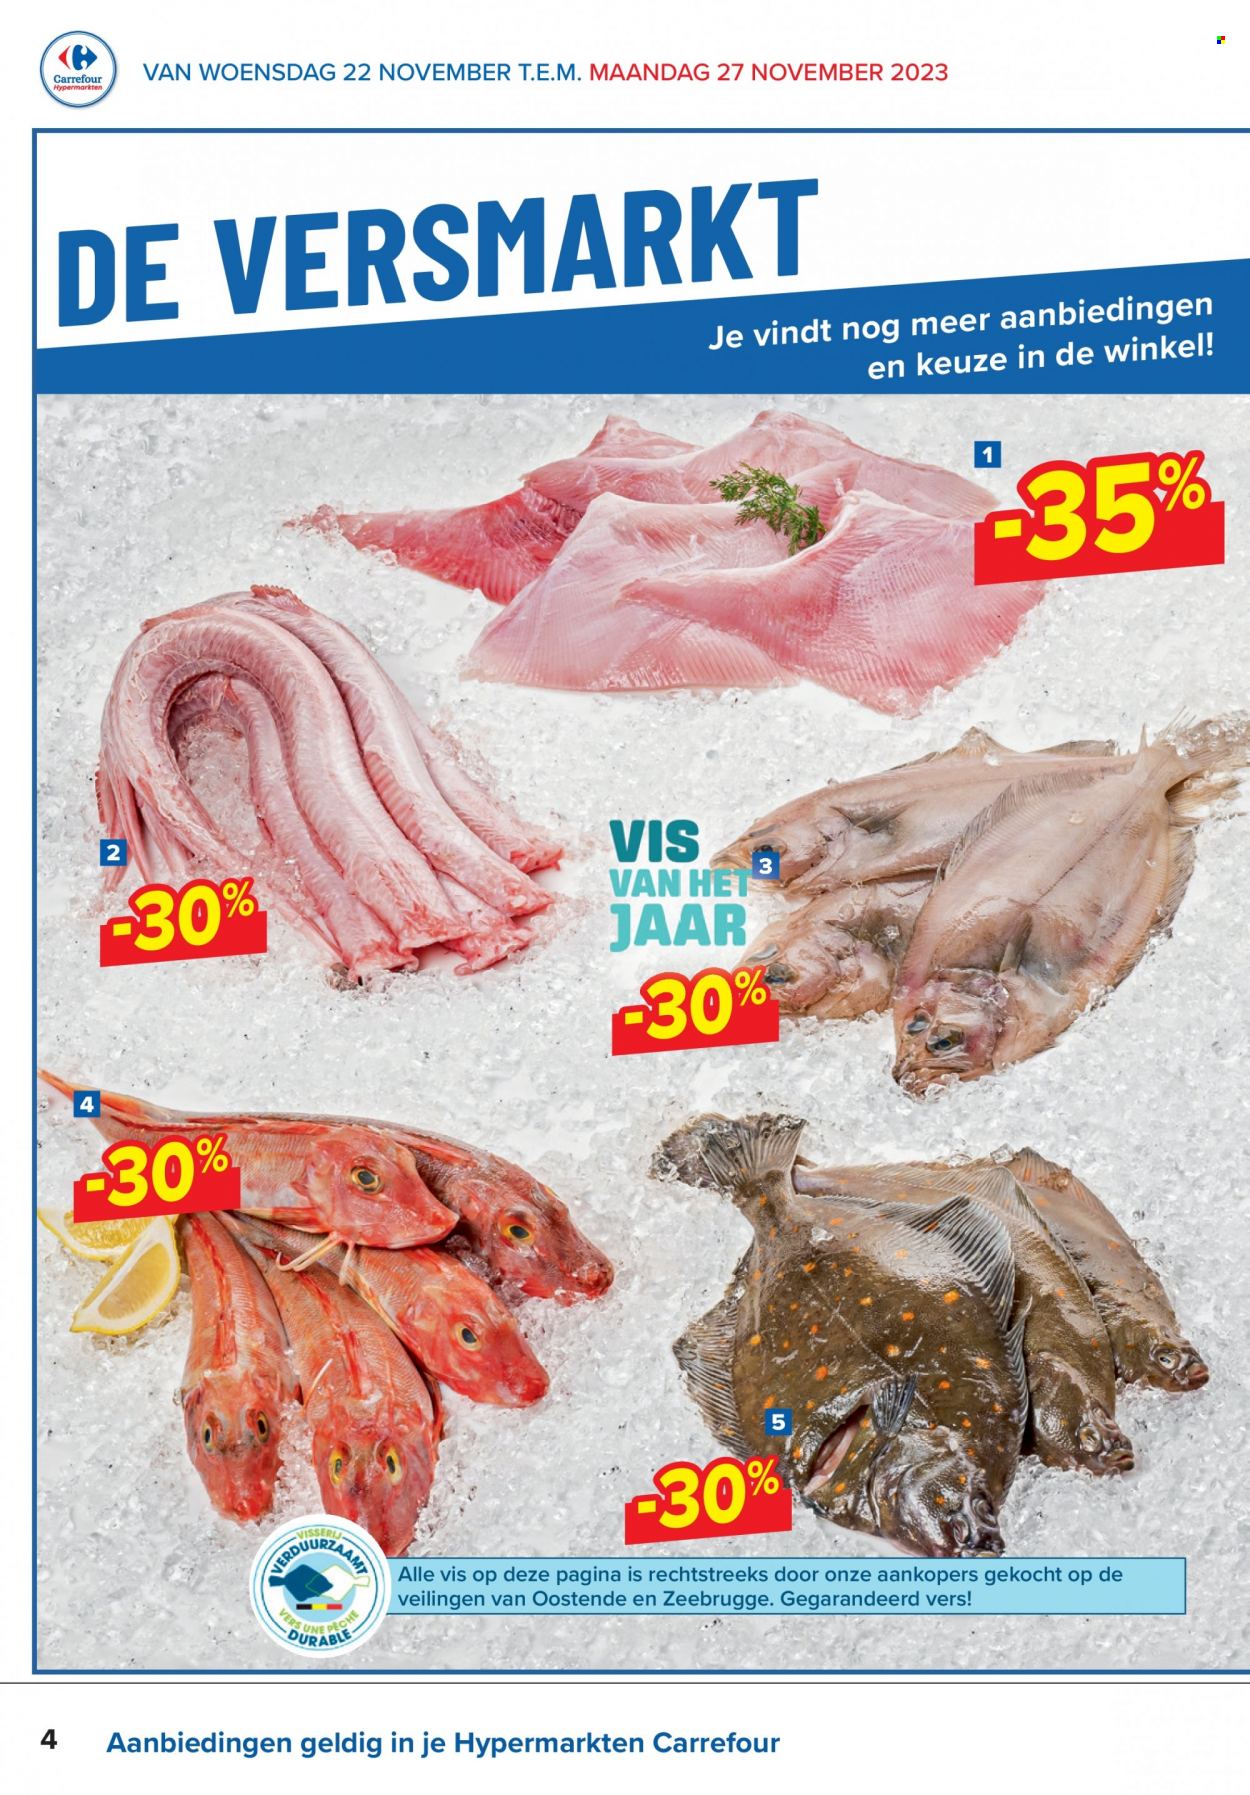 Catalogue Carrefour hypermarkt - 22.11.2023 - 4.12.2023. Page 4.